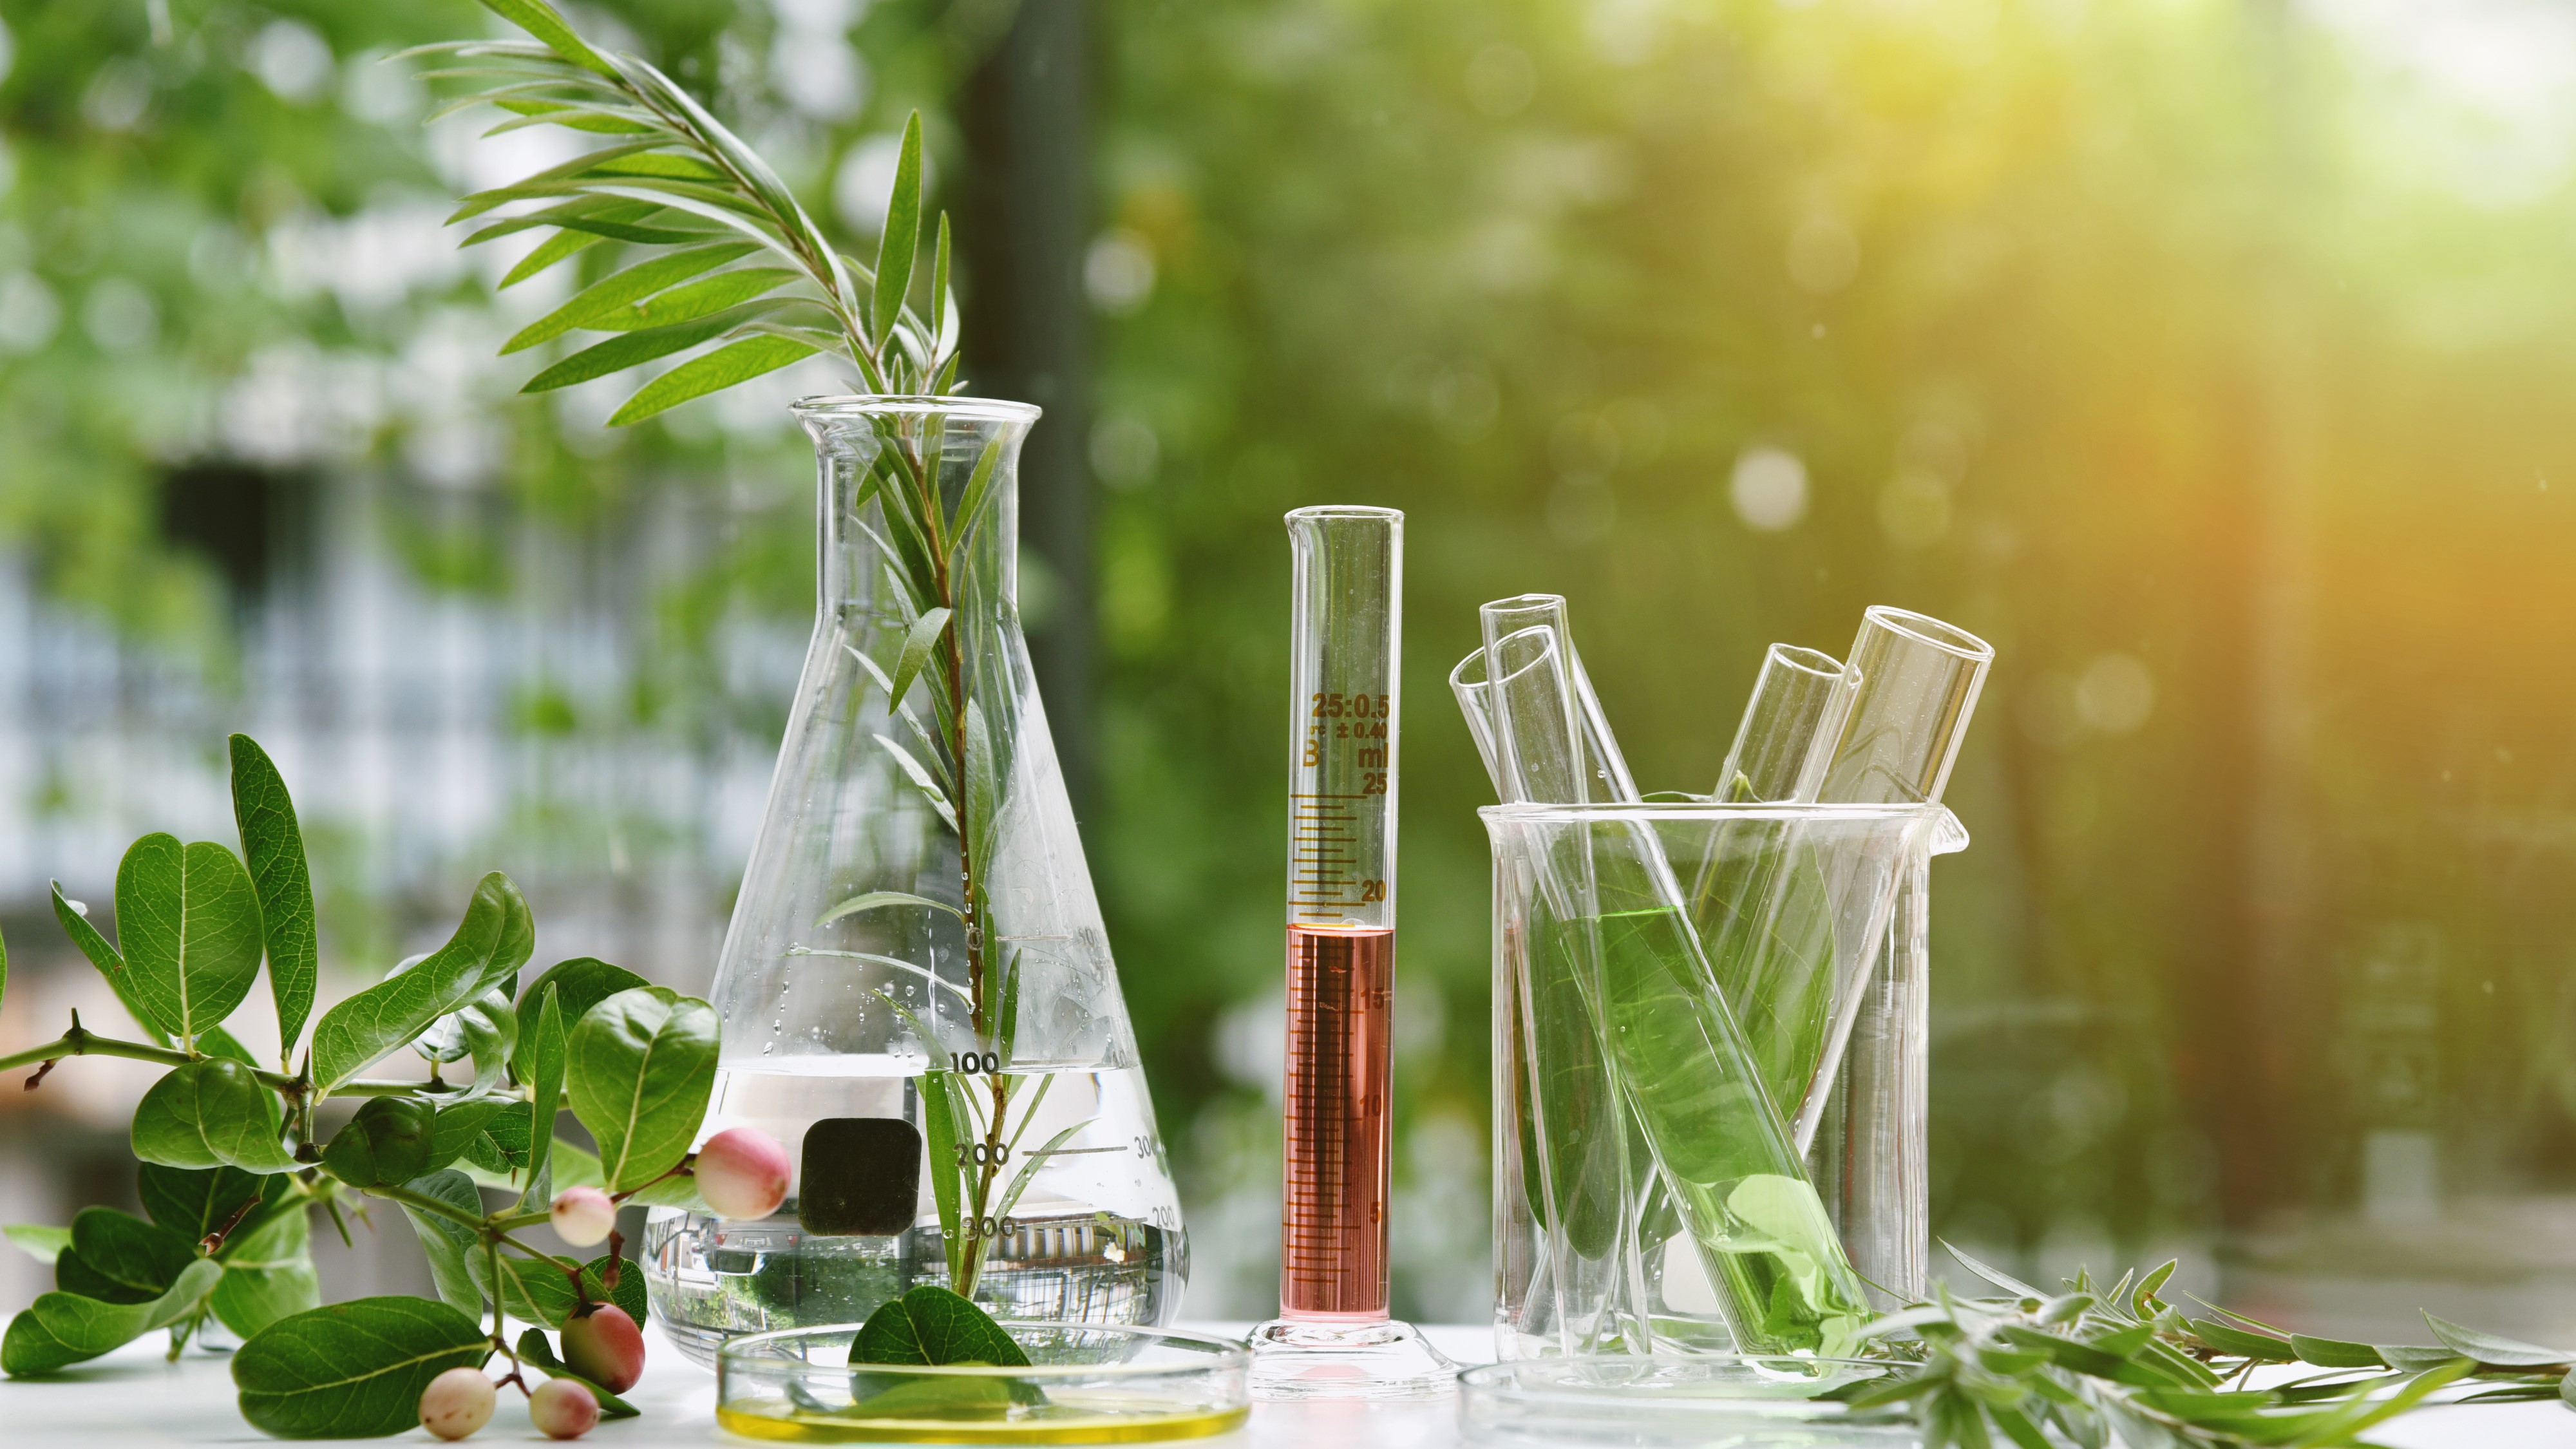 Leaves and berries in scientific instruments including test tubes and petri dish